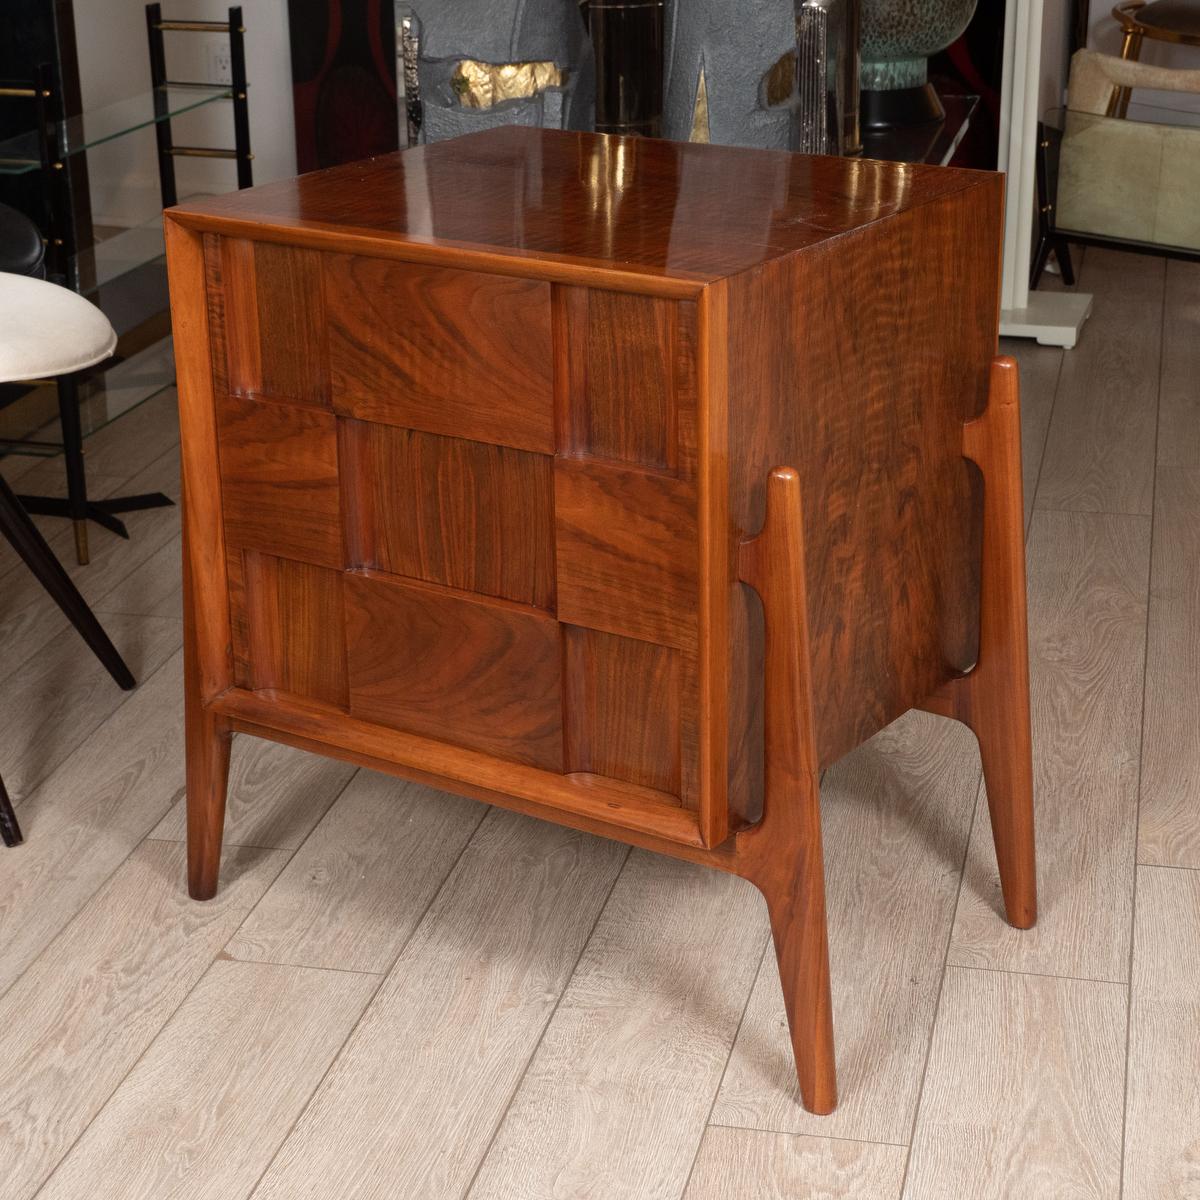 Pair of walnut checkered nightstands / side tables with drop-down front and single drawer by Edmond Spence.